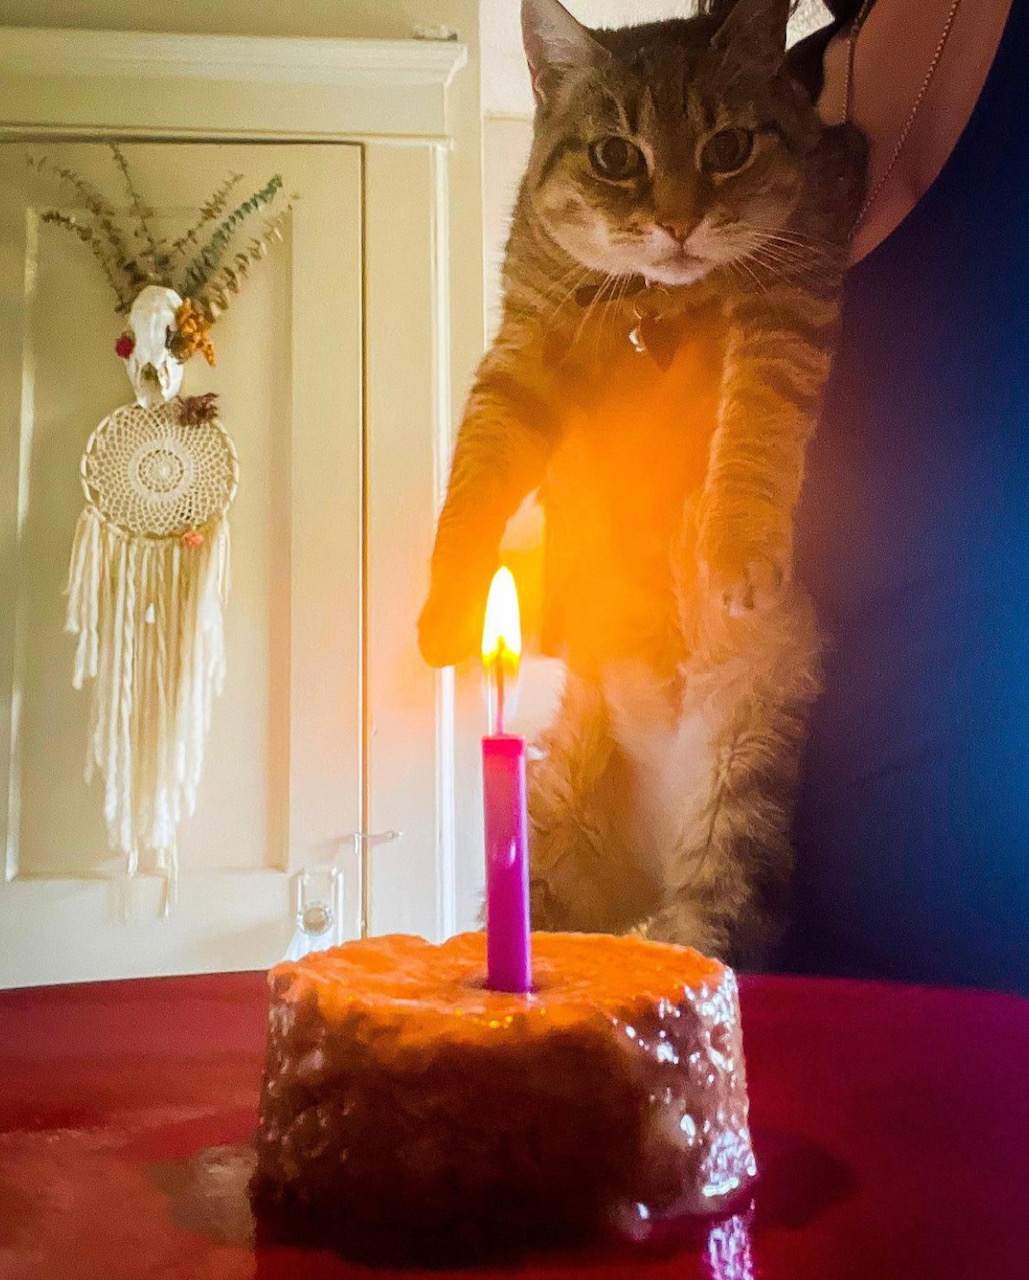 A cat with a birthday treat